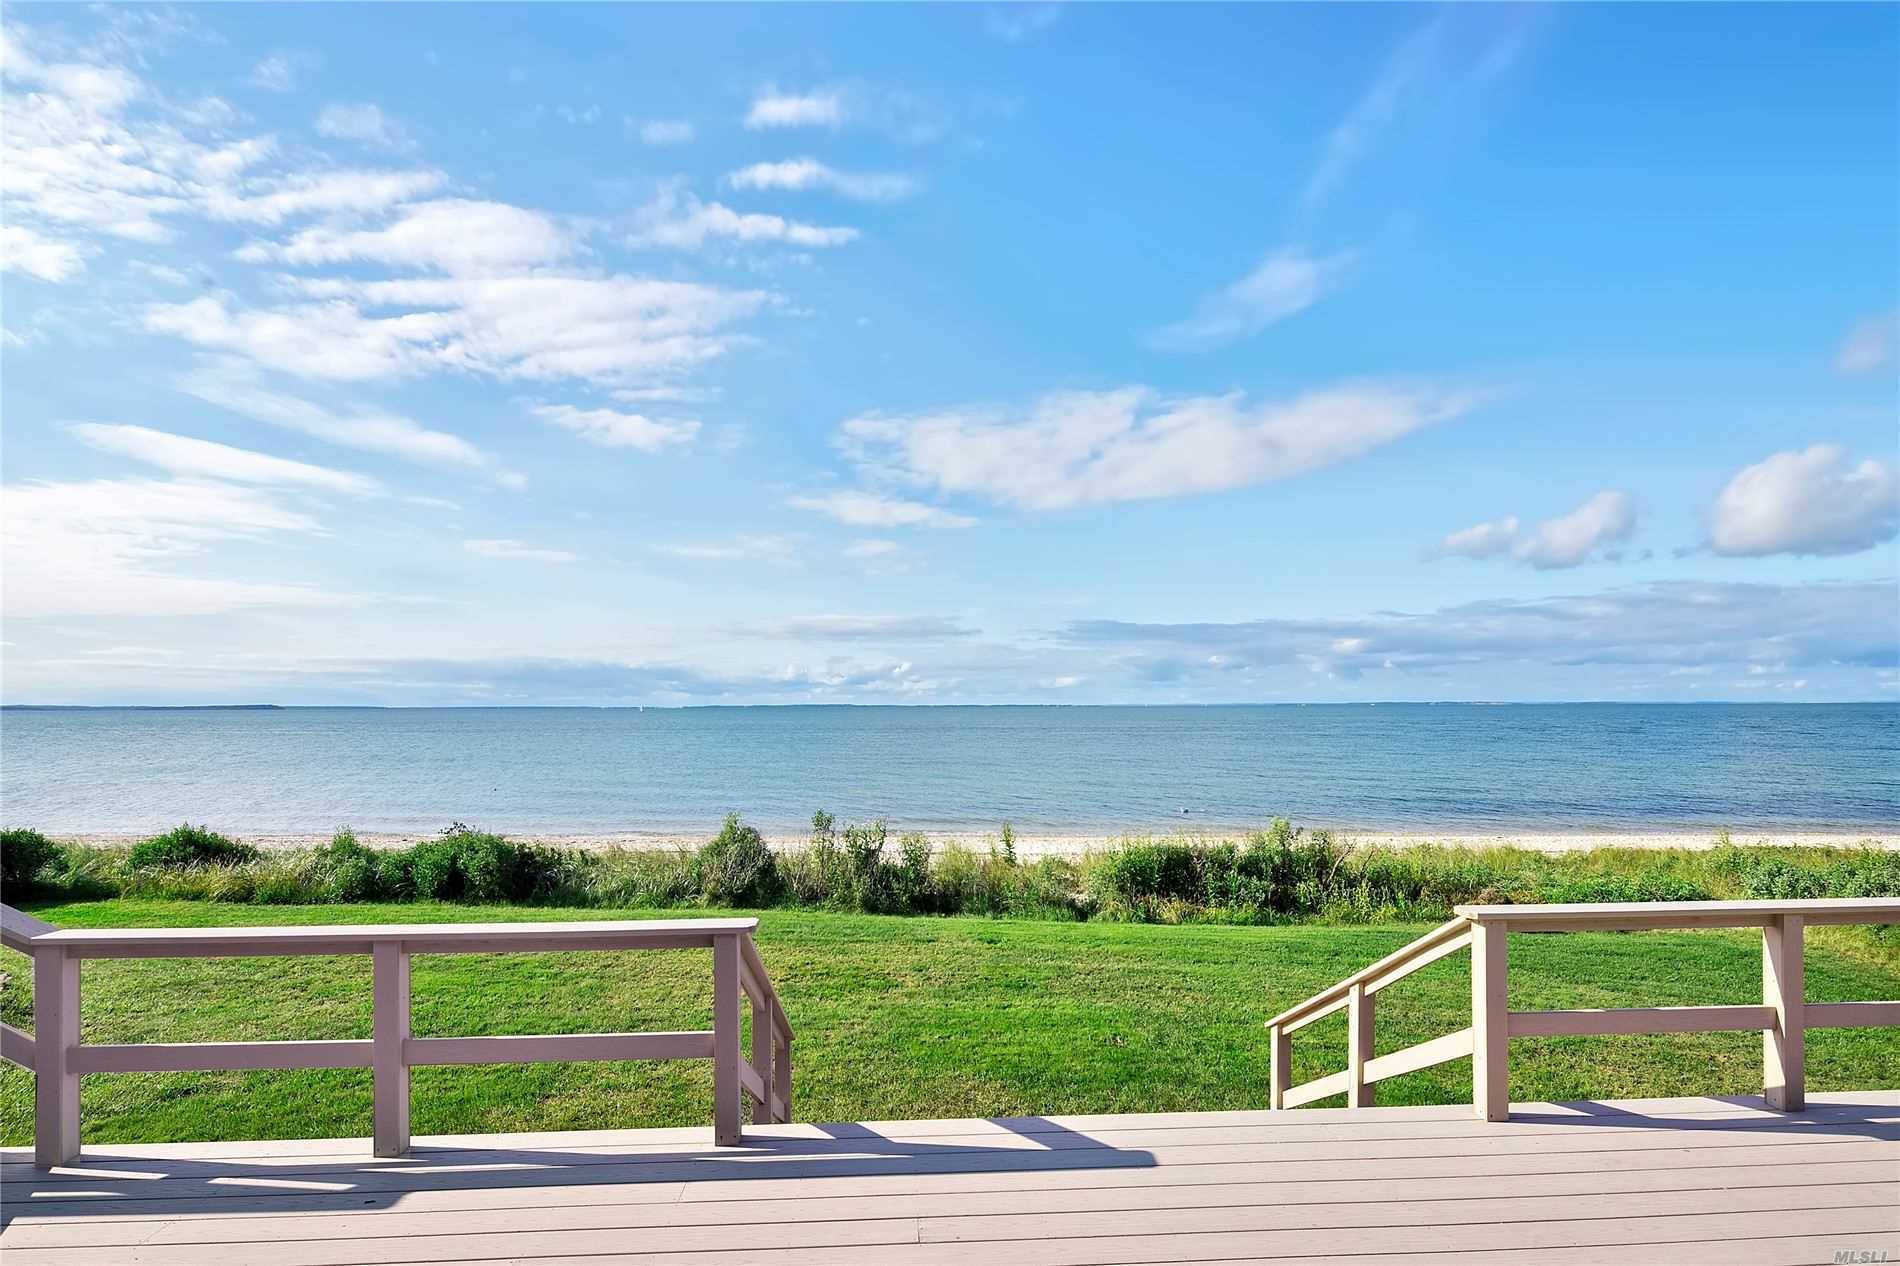 Great location ! This waterfront property with amazing sunsets make this home so special on Gardiners Bay in East Hampton.